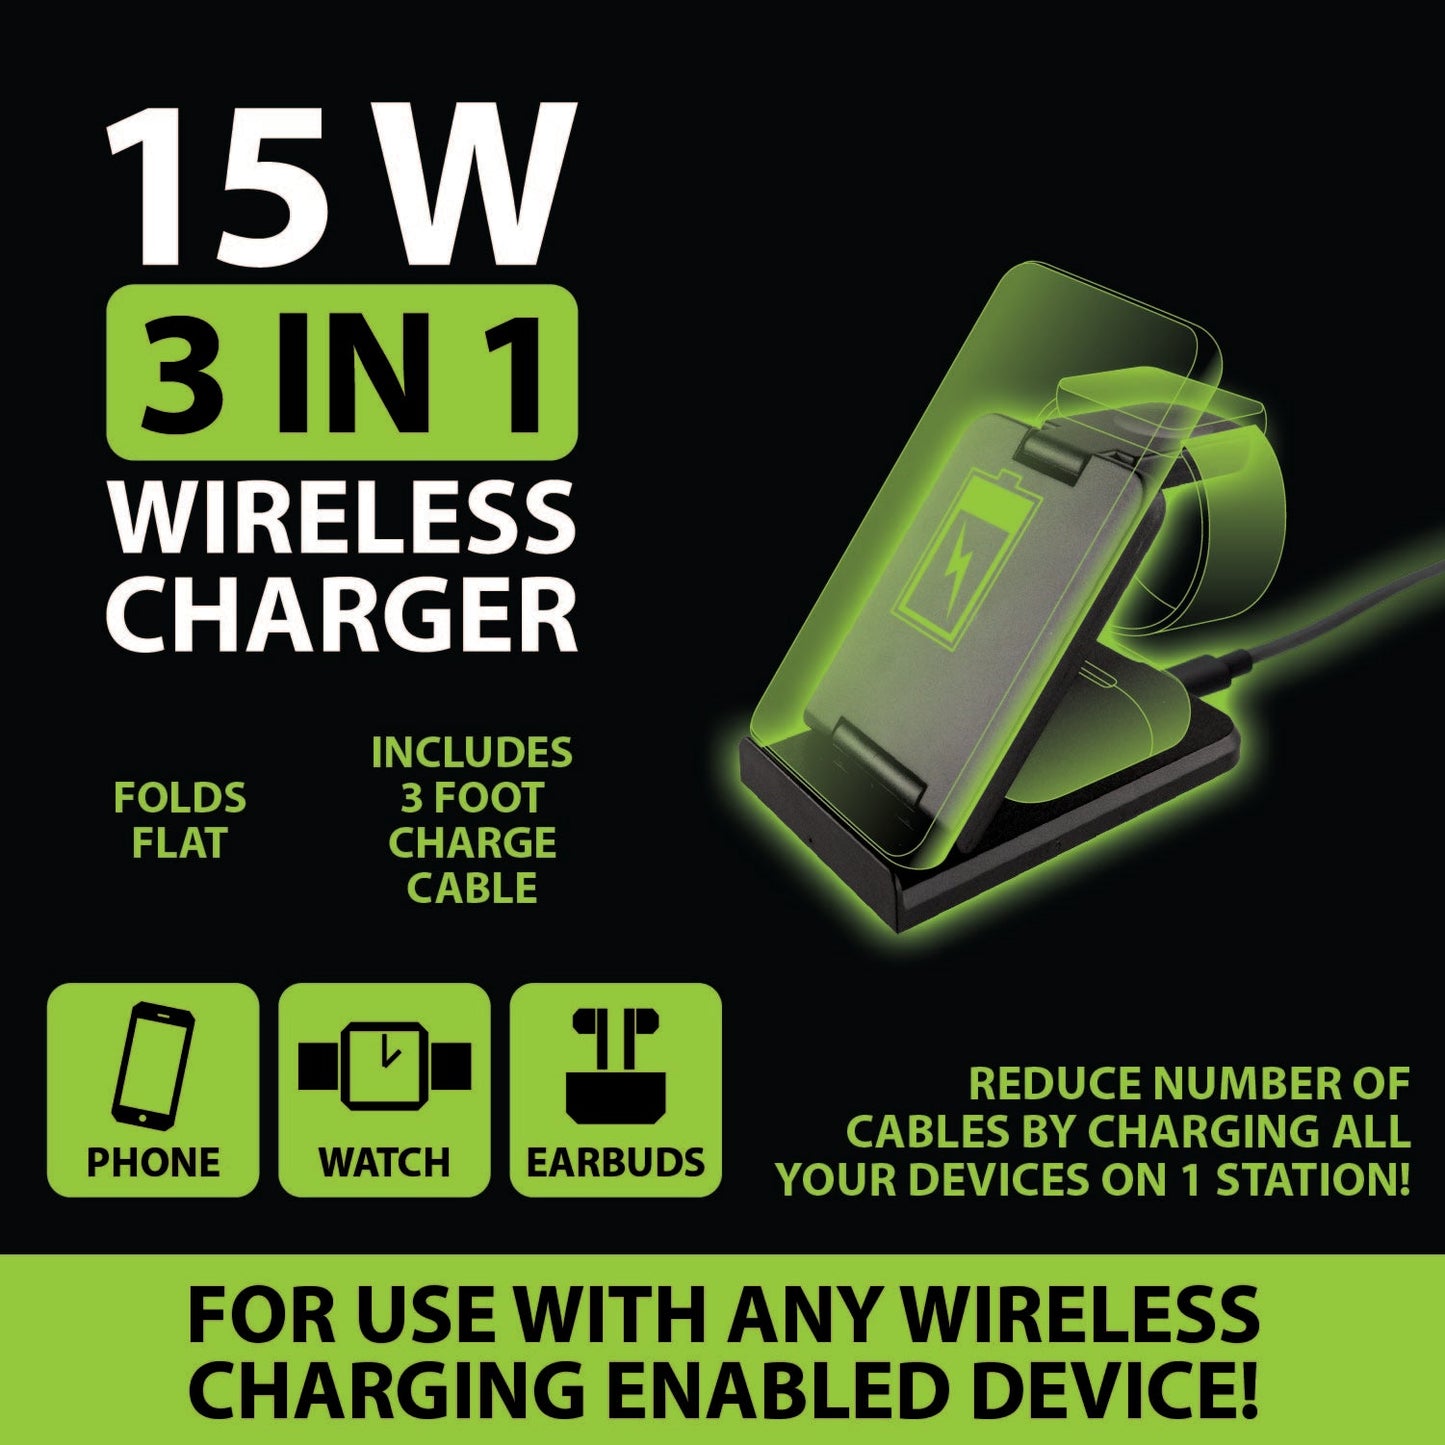 ITEM NUMBER 022827 3 IN 1 WIRELESS CHARGER 4 PIECES PER DISPLAY